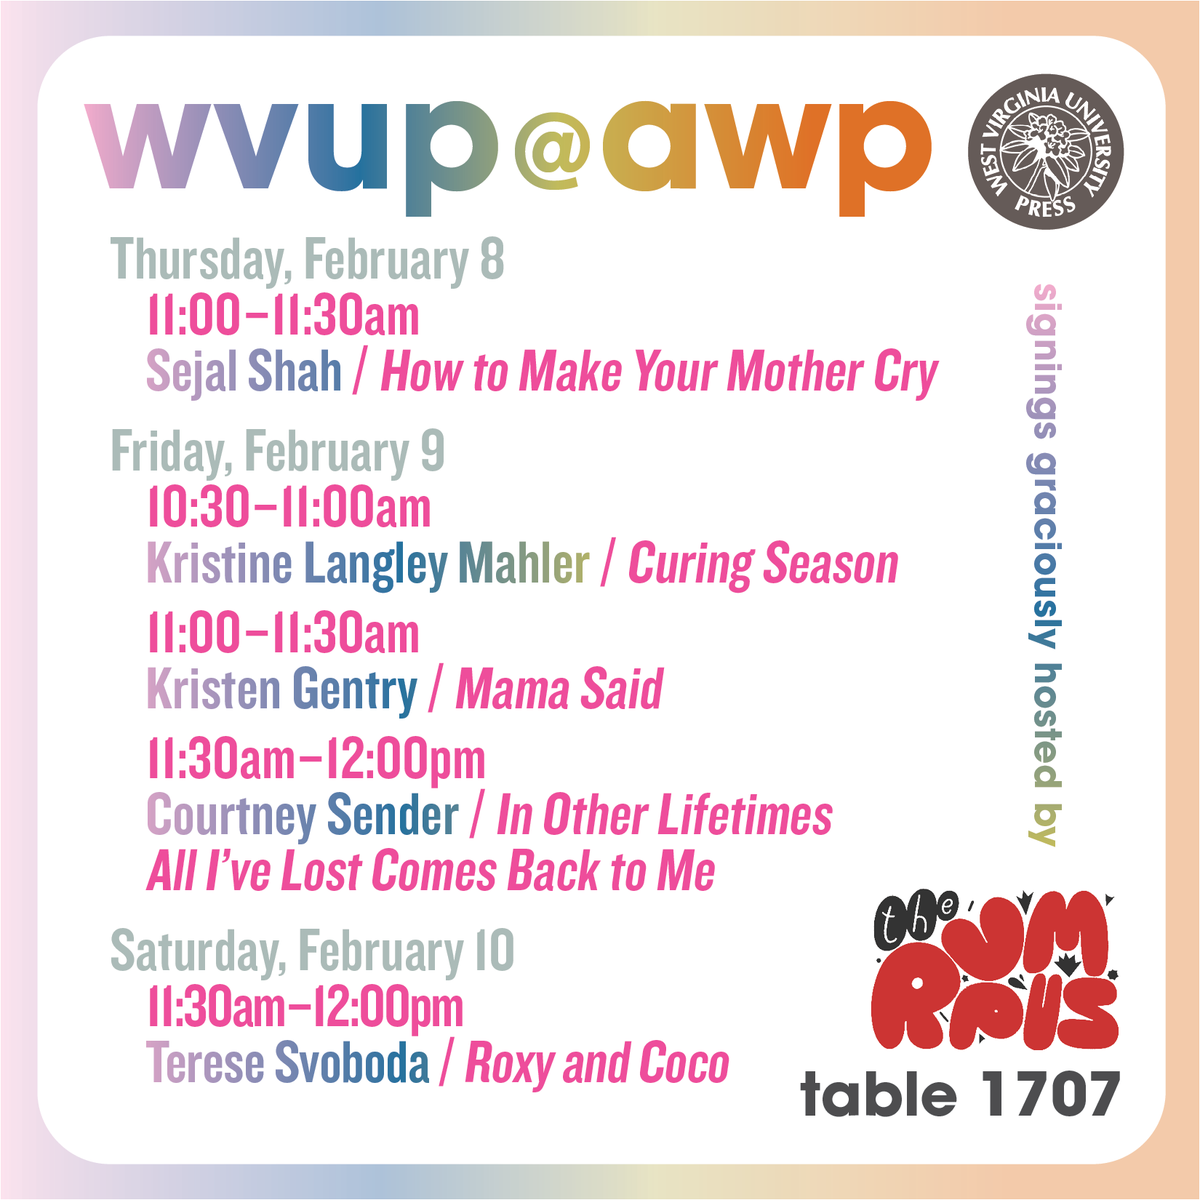 West Virginia University Press had to skip AWP this year, but that didn't stop our kind friends @The_Rumpus from offering to host a few WVUP authors for signings at their table (1707). Here's a handy guide to dates, times, and authors. @SejalShahWrites @suburbanprairie…